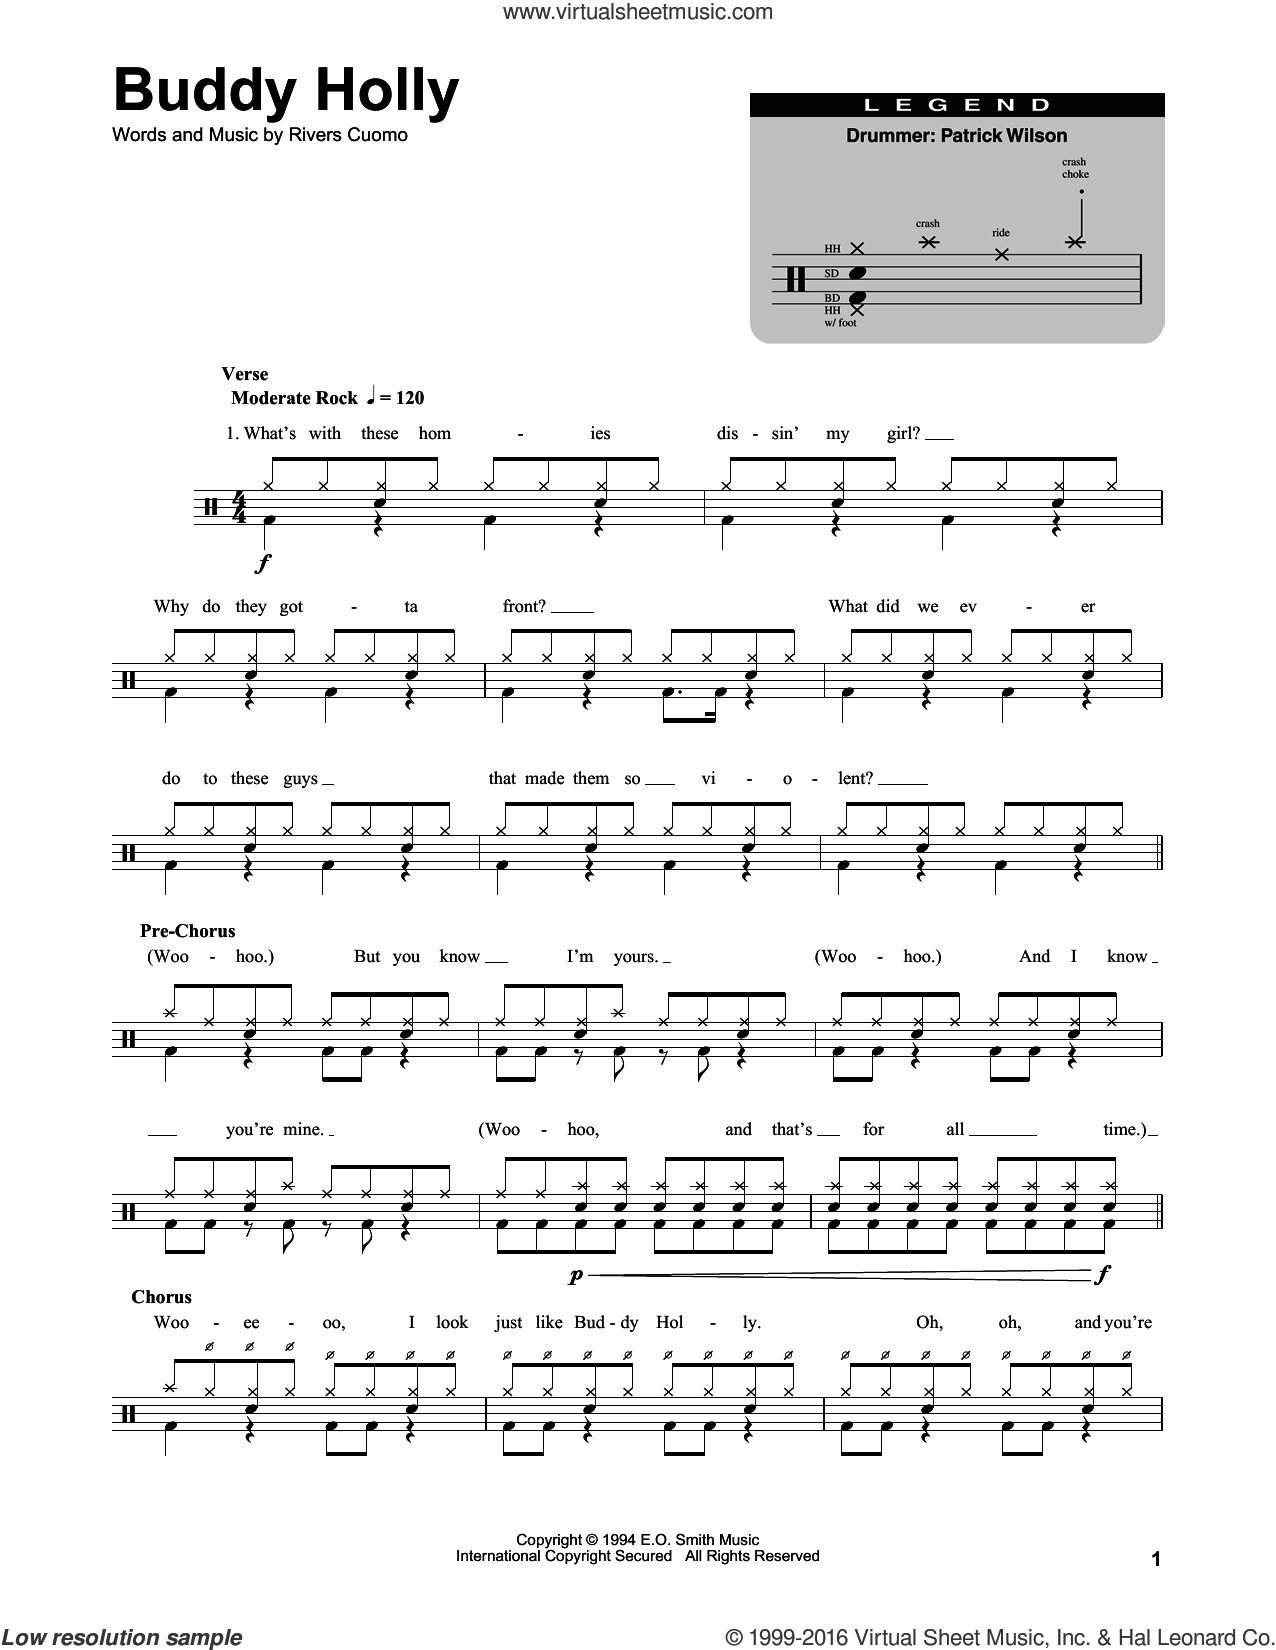 Undone - The Sweater Song Sheet Music - 5 Arrangements Available